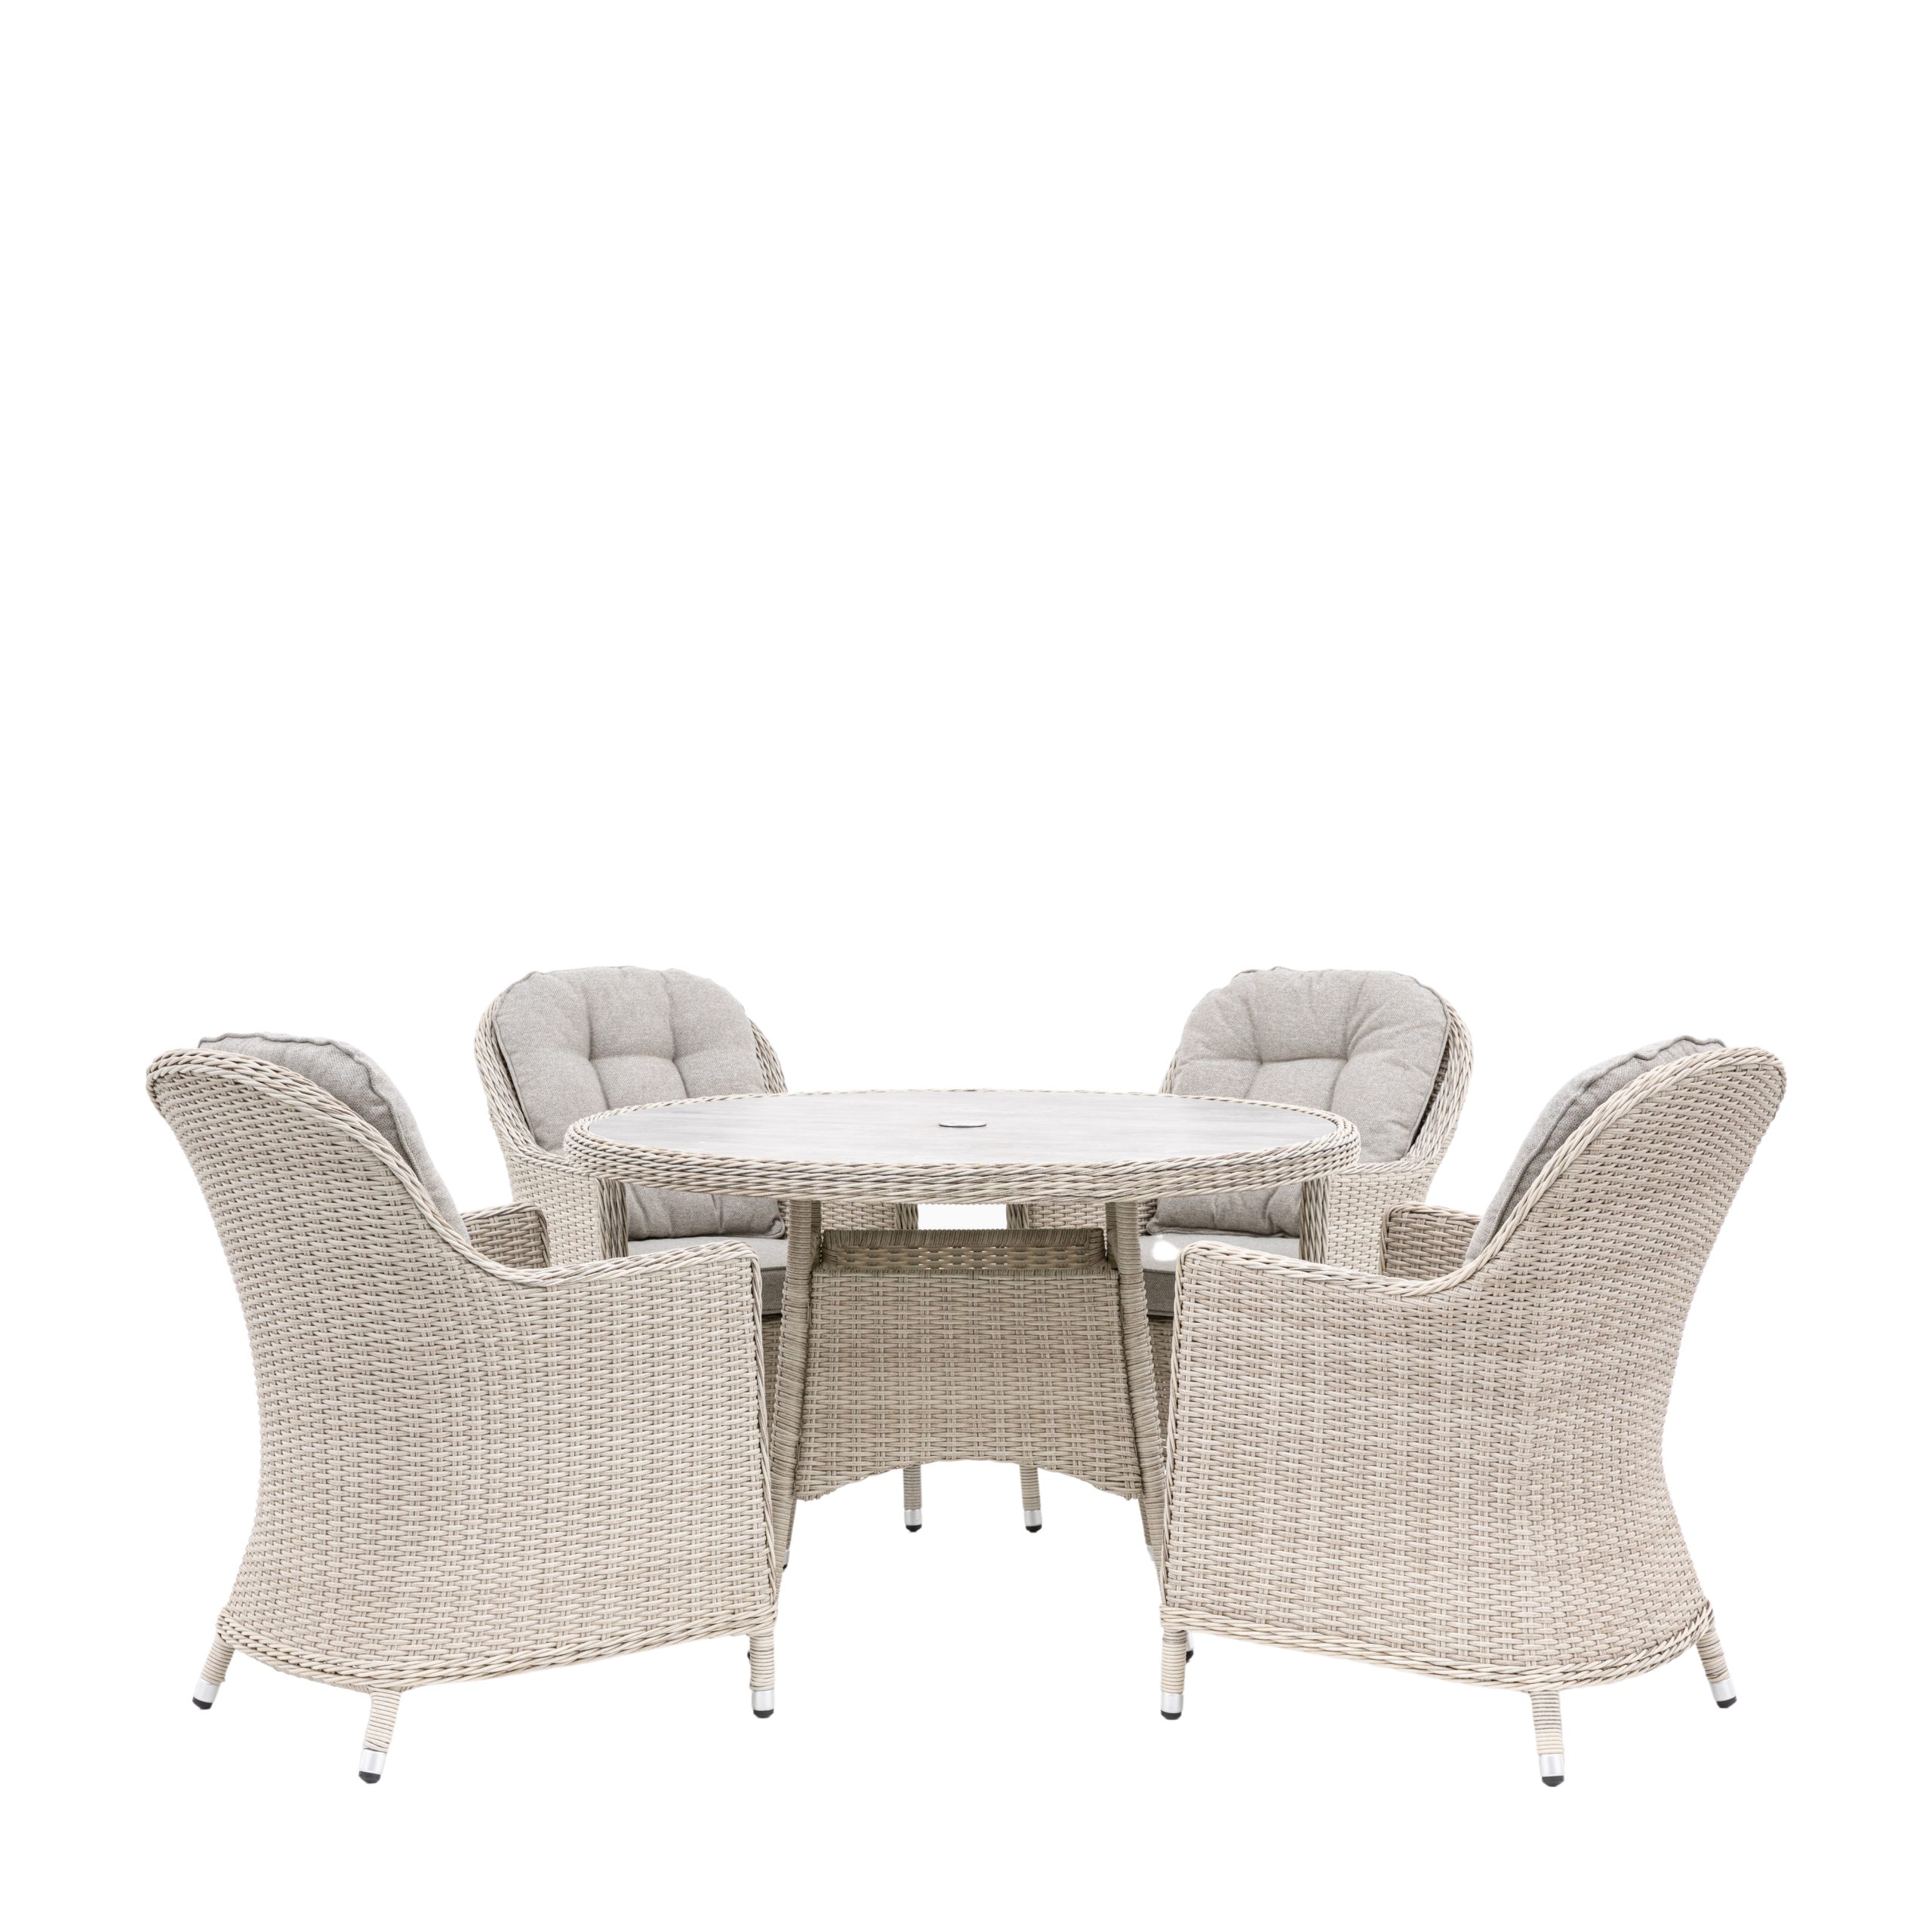 Gallery Direct Holton 4 Seat Dining Set